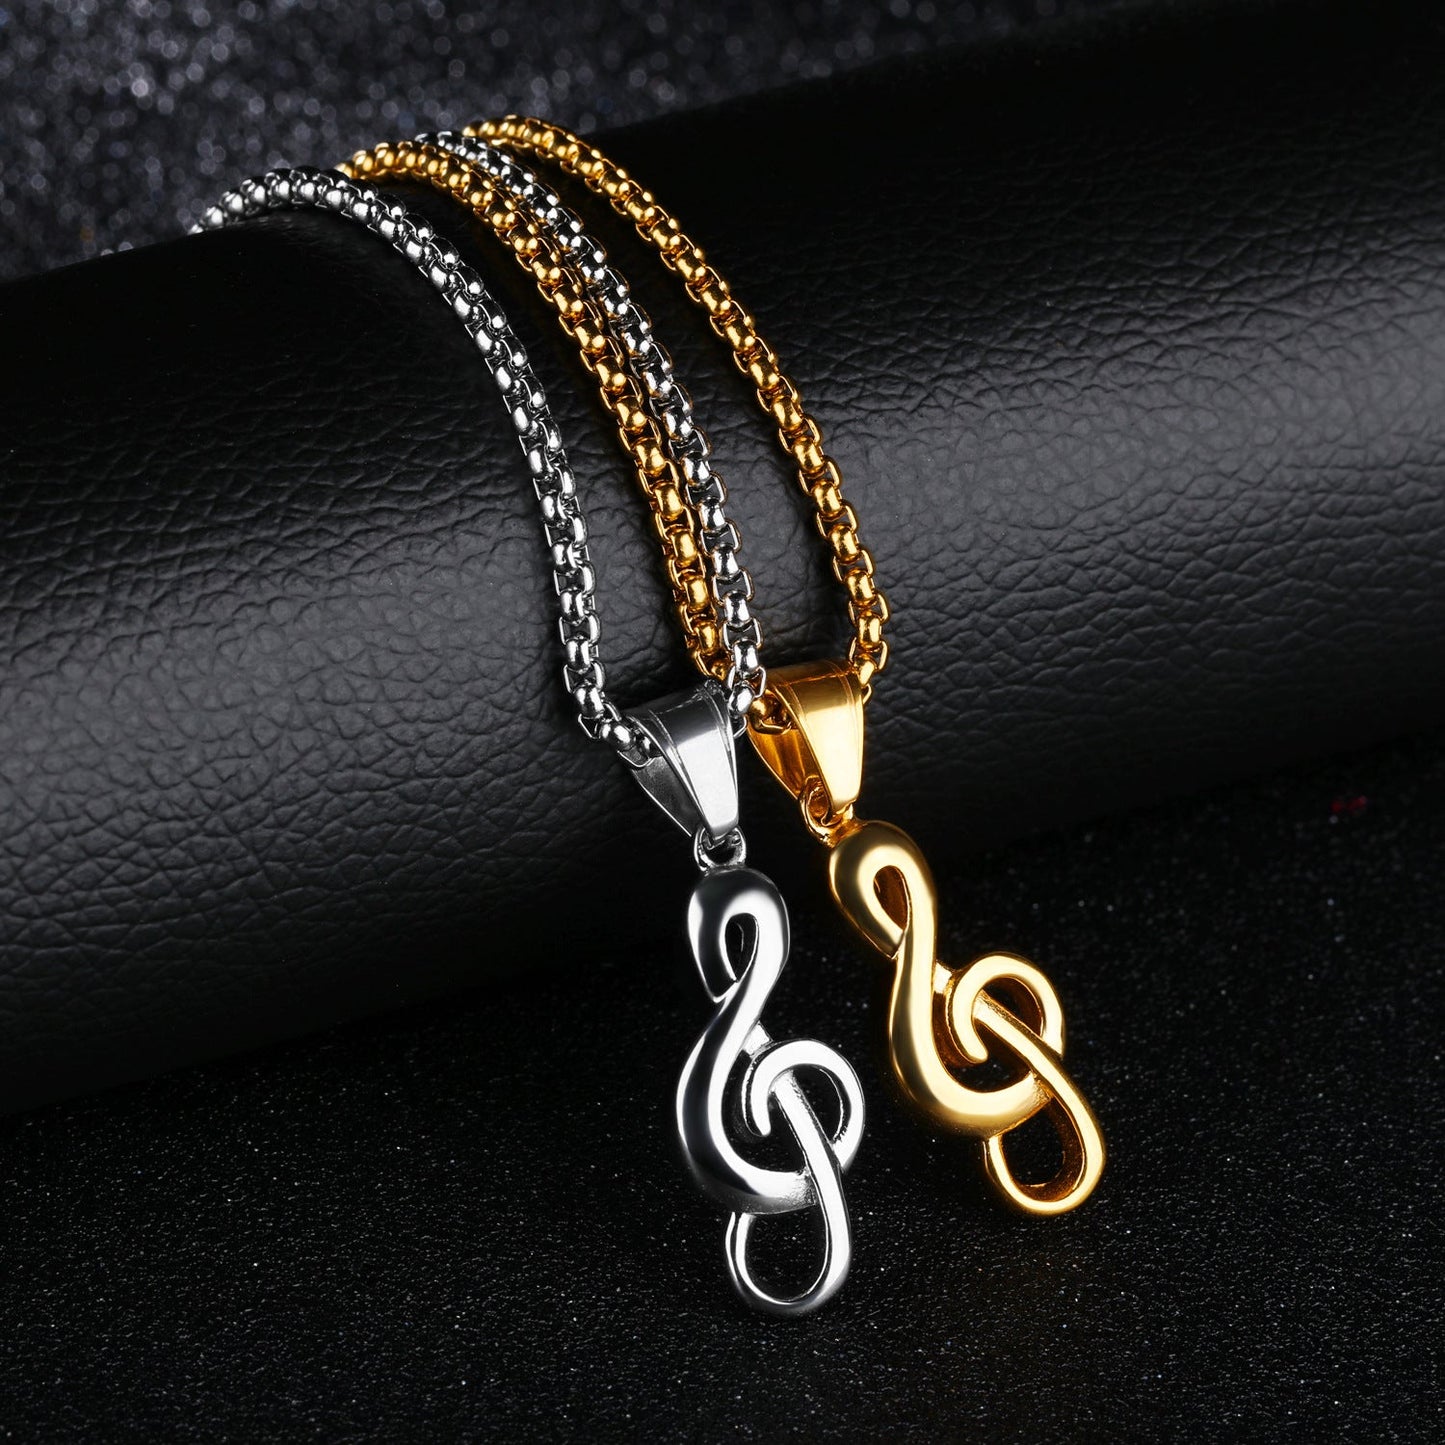 creative music notation necklace musical note pendant necklace